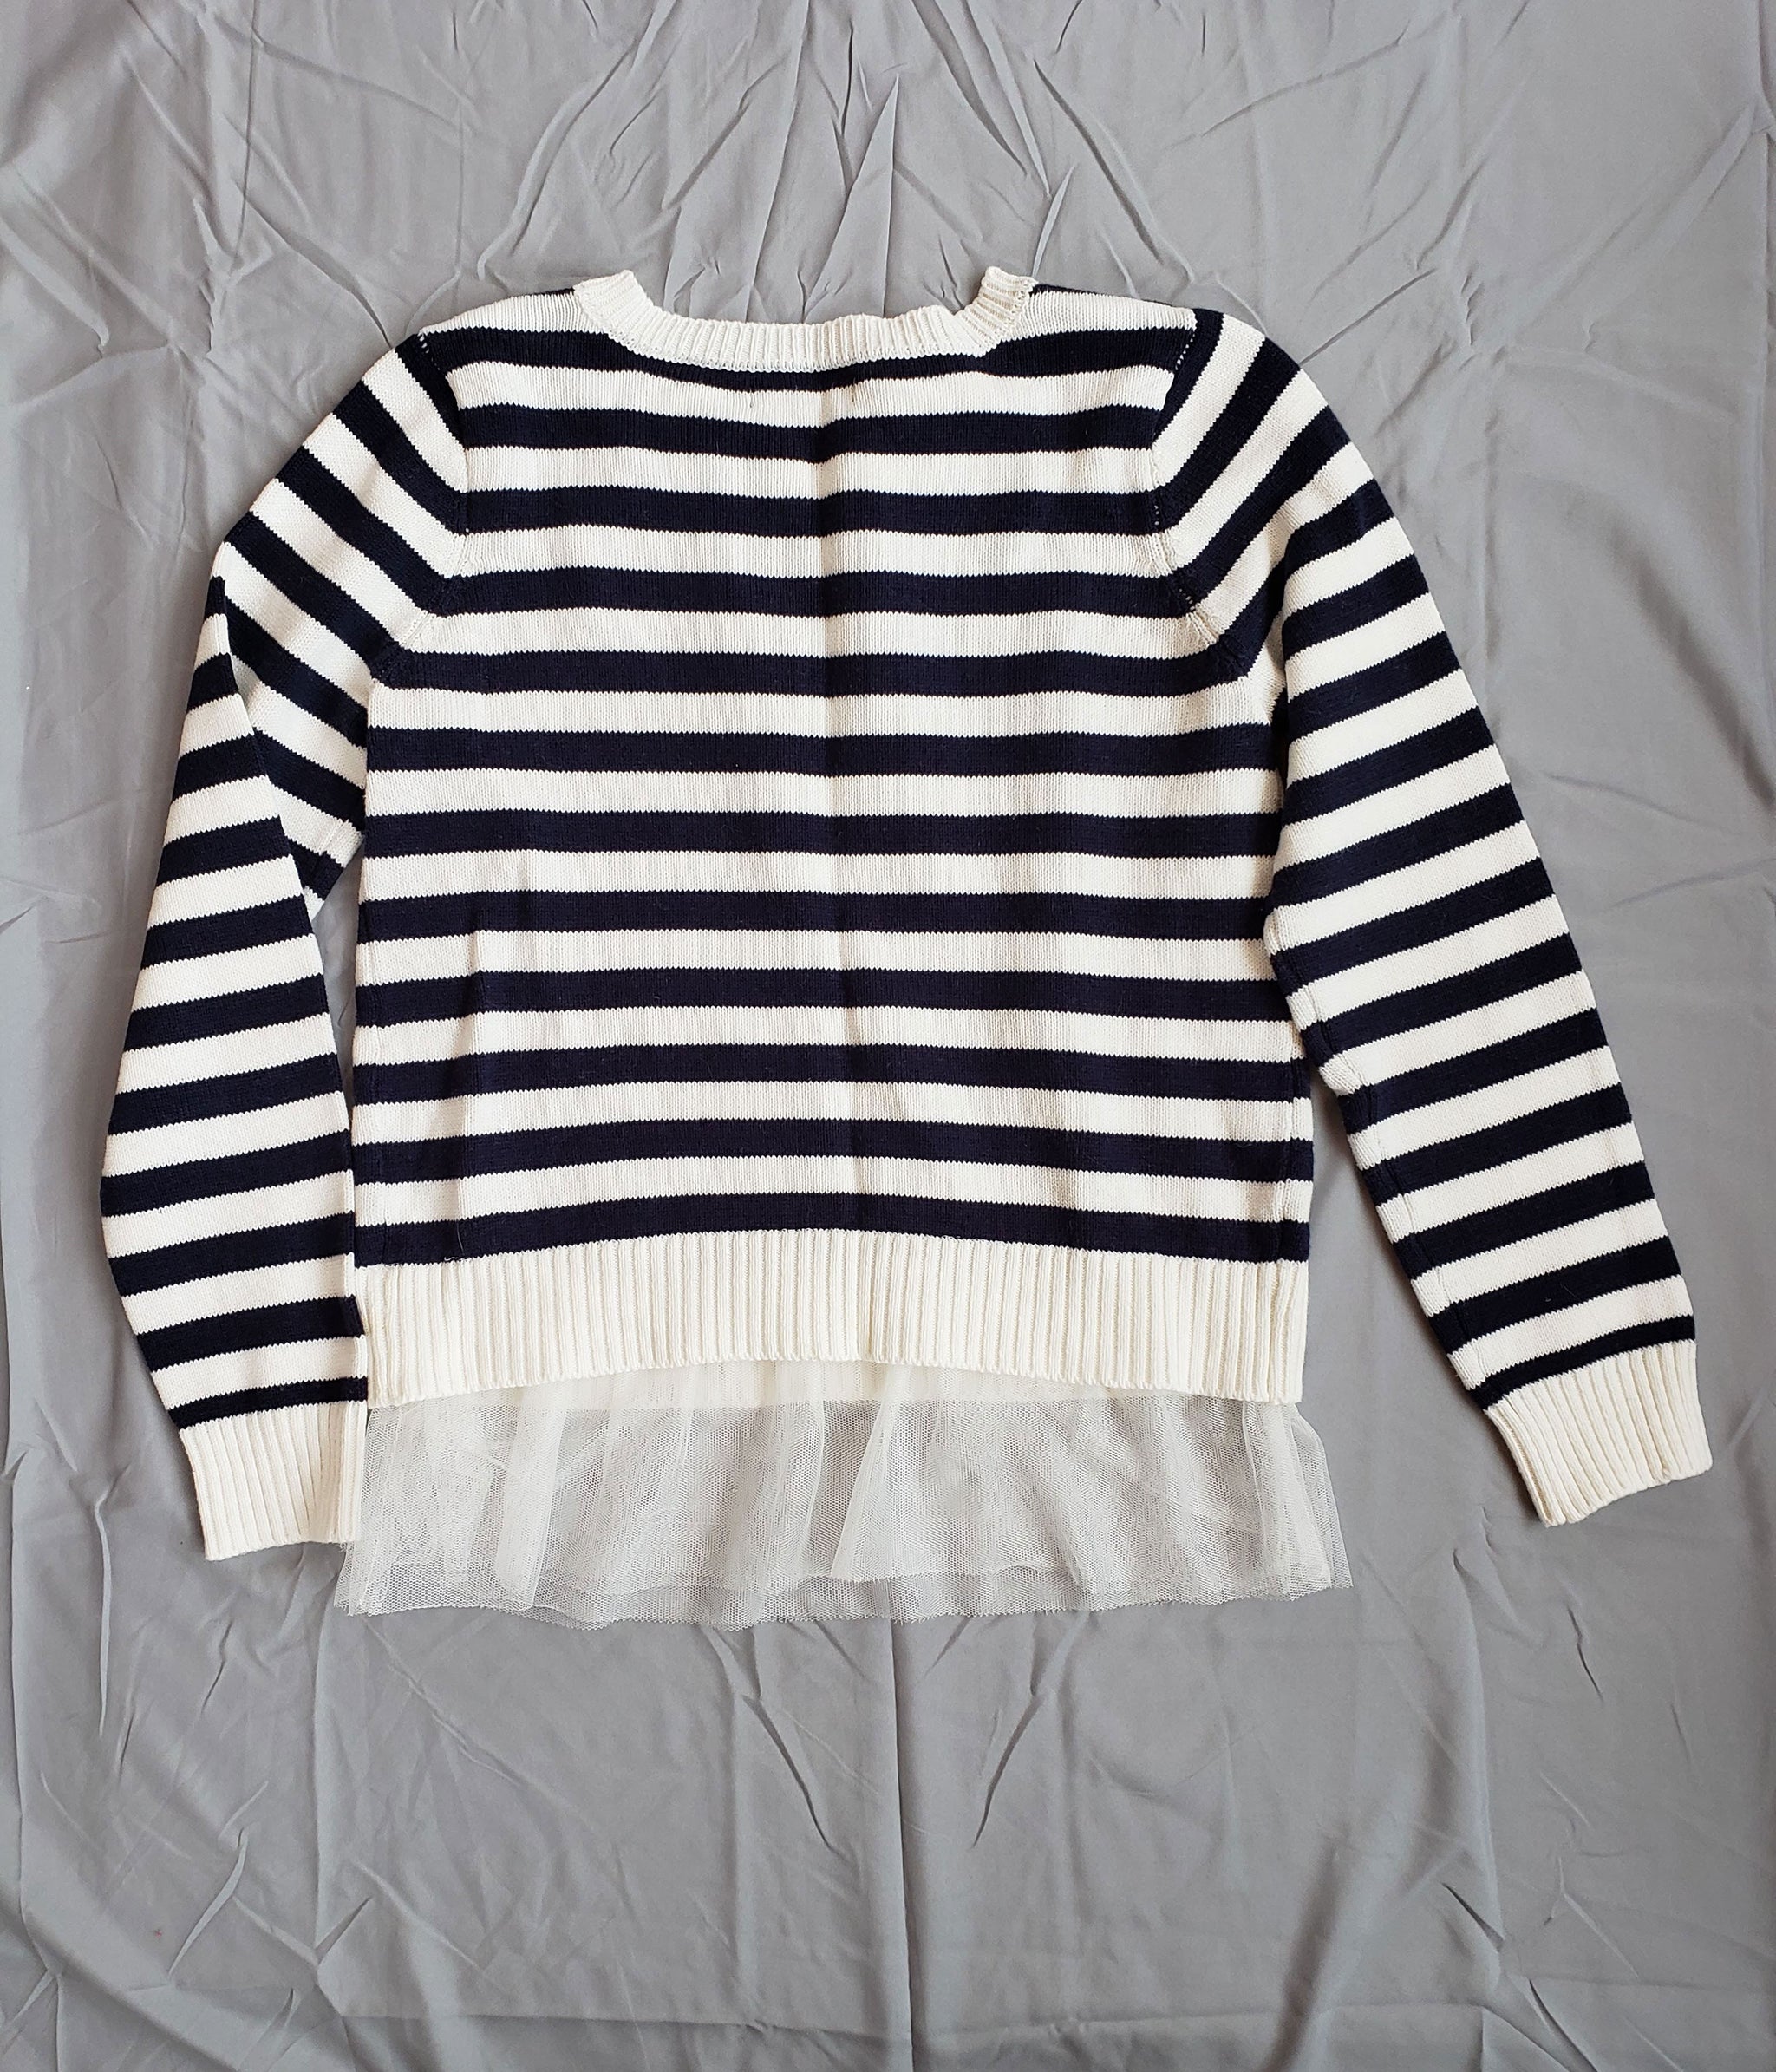 Nautica Anchor Sweater with Tulle Hem - Navy/Cream Striped